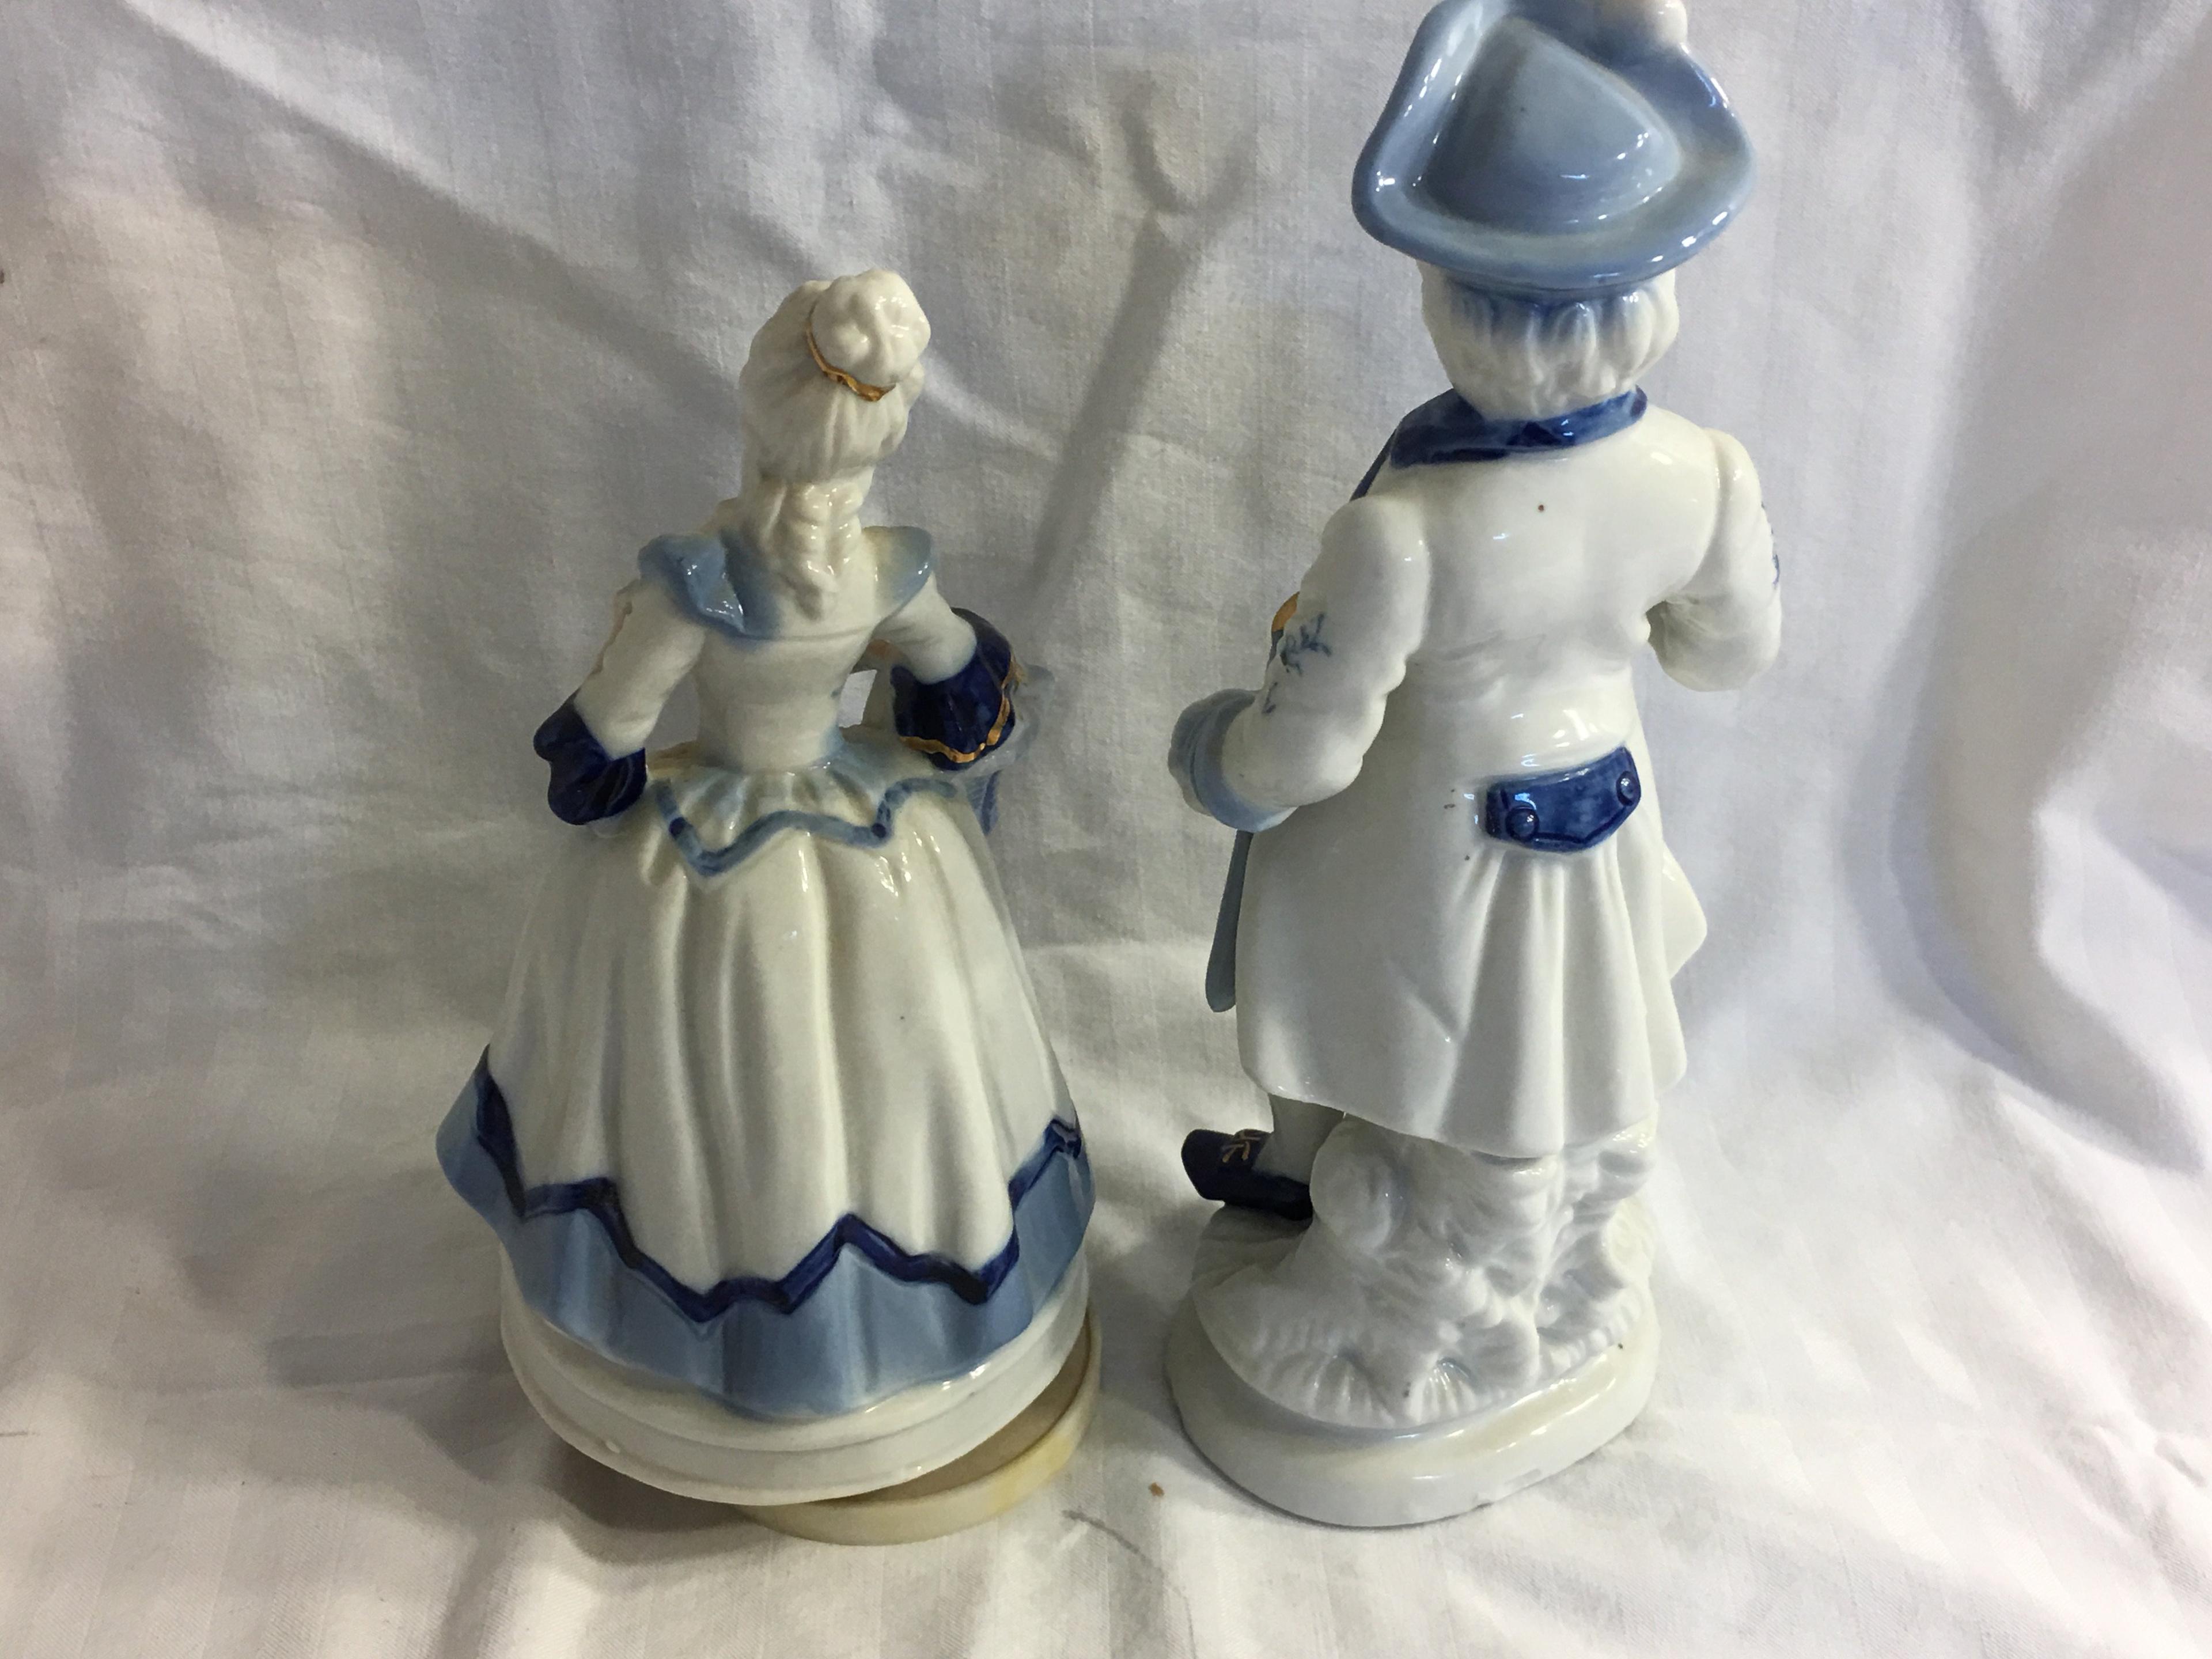 Lot of 2 Pieces Collector Japanese Porcelain Figurines 7-9"Tall /Each - See Pictures